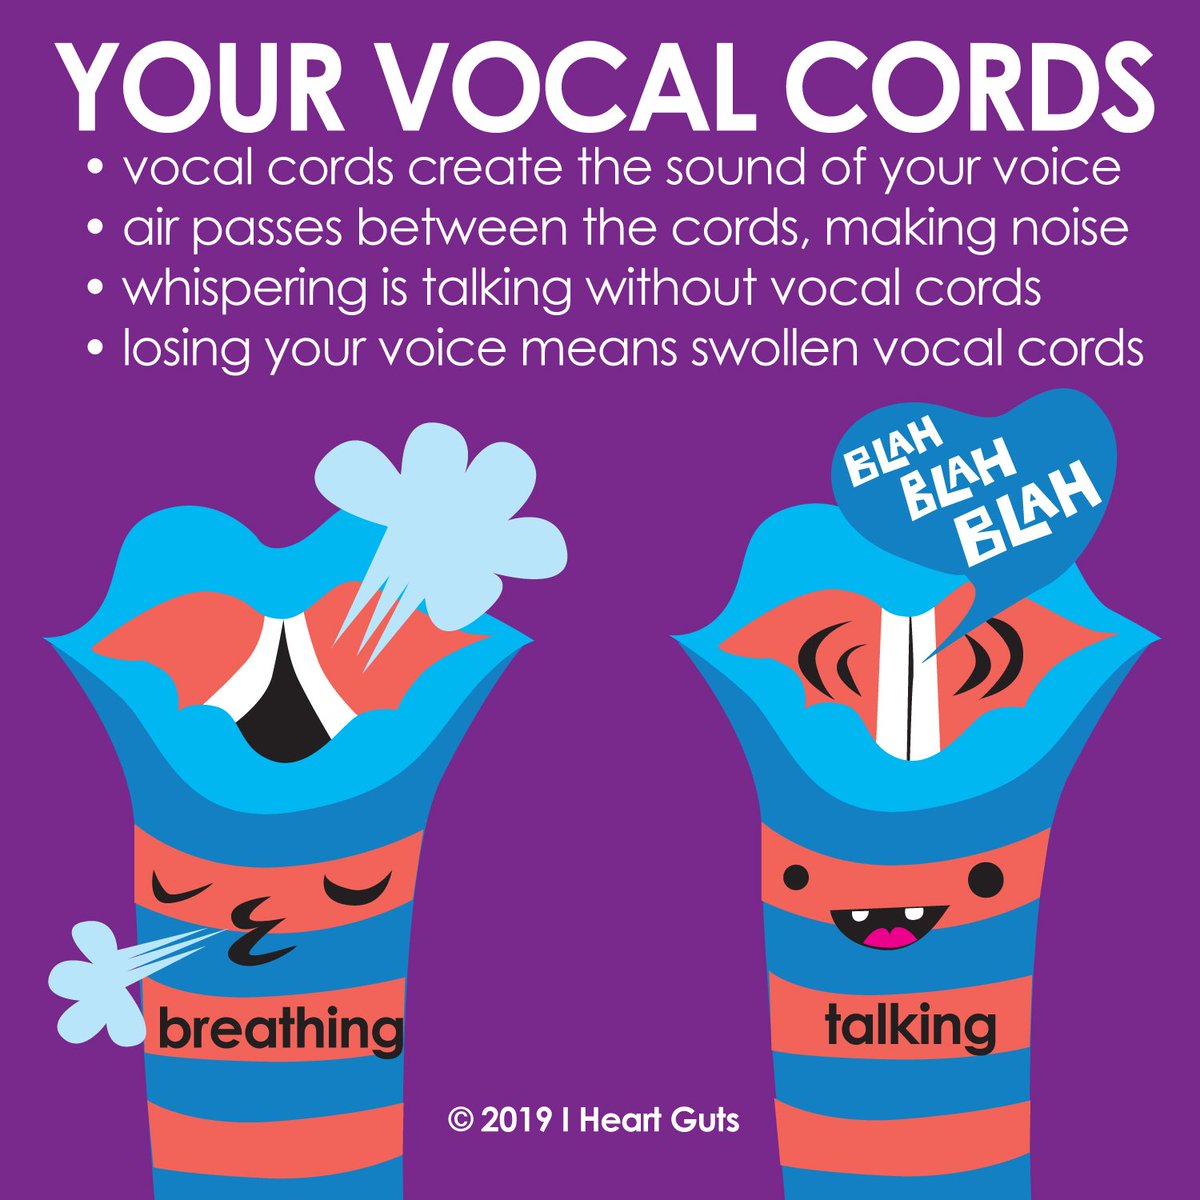 Another fascinating fact? The #hormone #testosterone elongates the #vocalcords, which leads to a deeper — and sometimes squeaky — #voice during #puberty.

#larynx #trachea #voicebox #otolaryngology #tracheostomy #laryngomalacia #laryngitis #anatomy #anatomyfacts